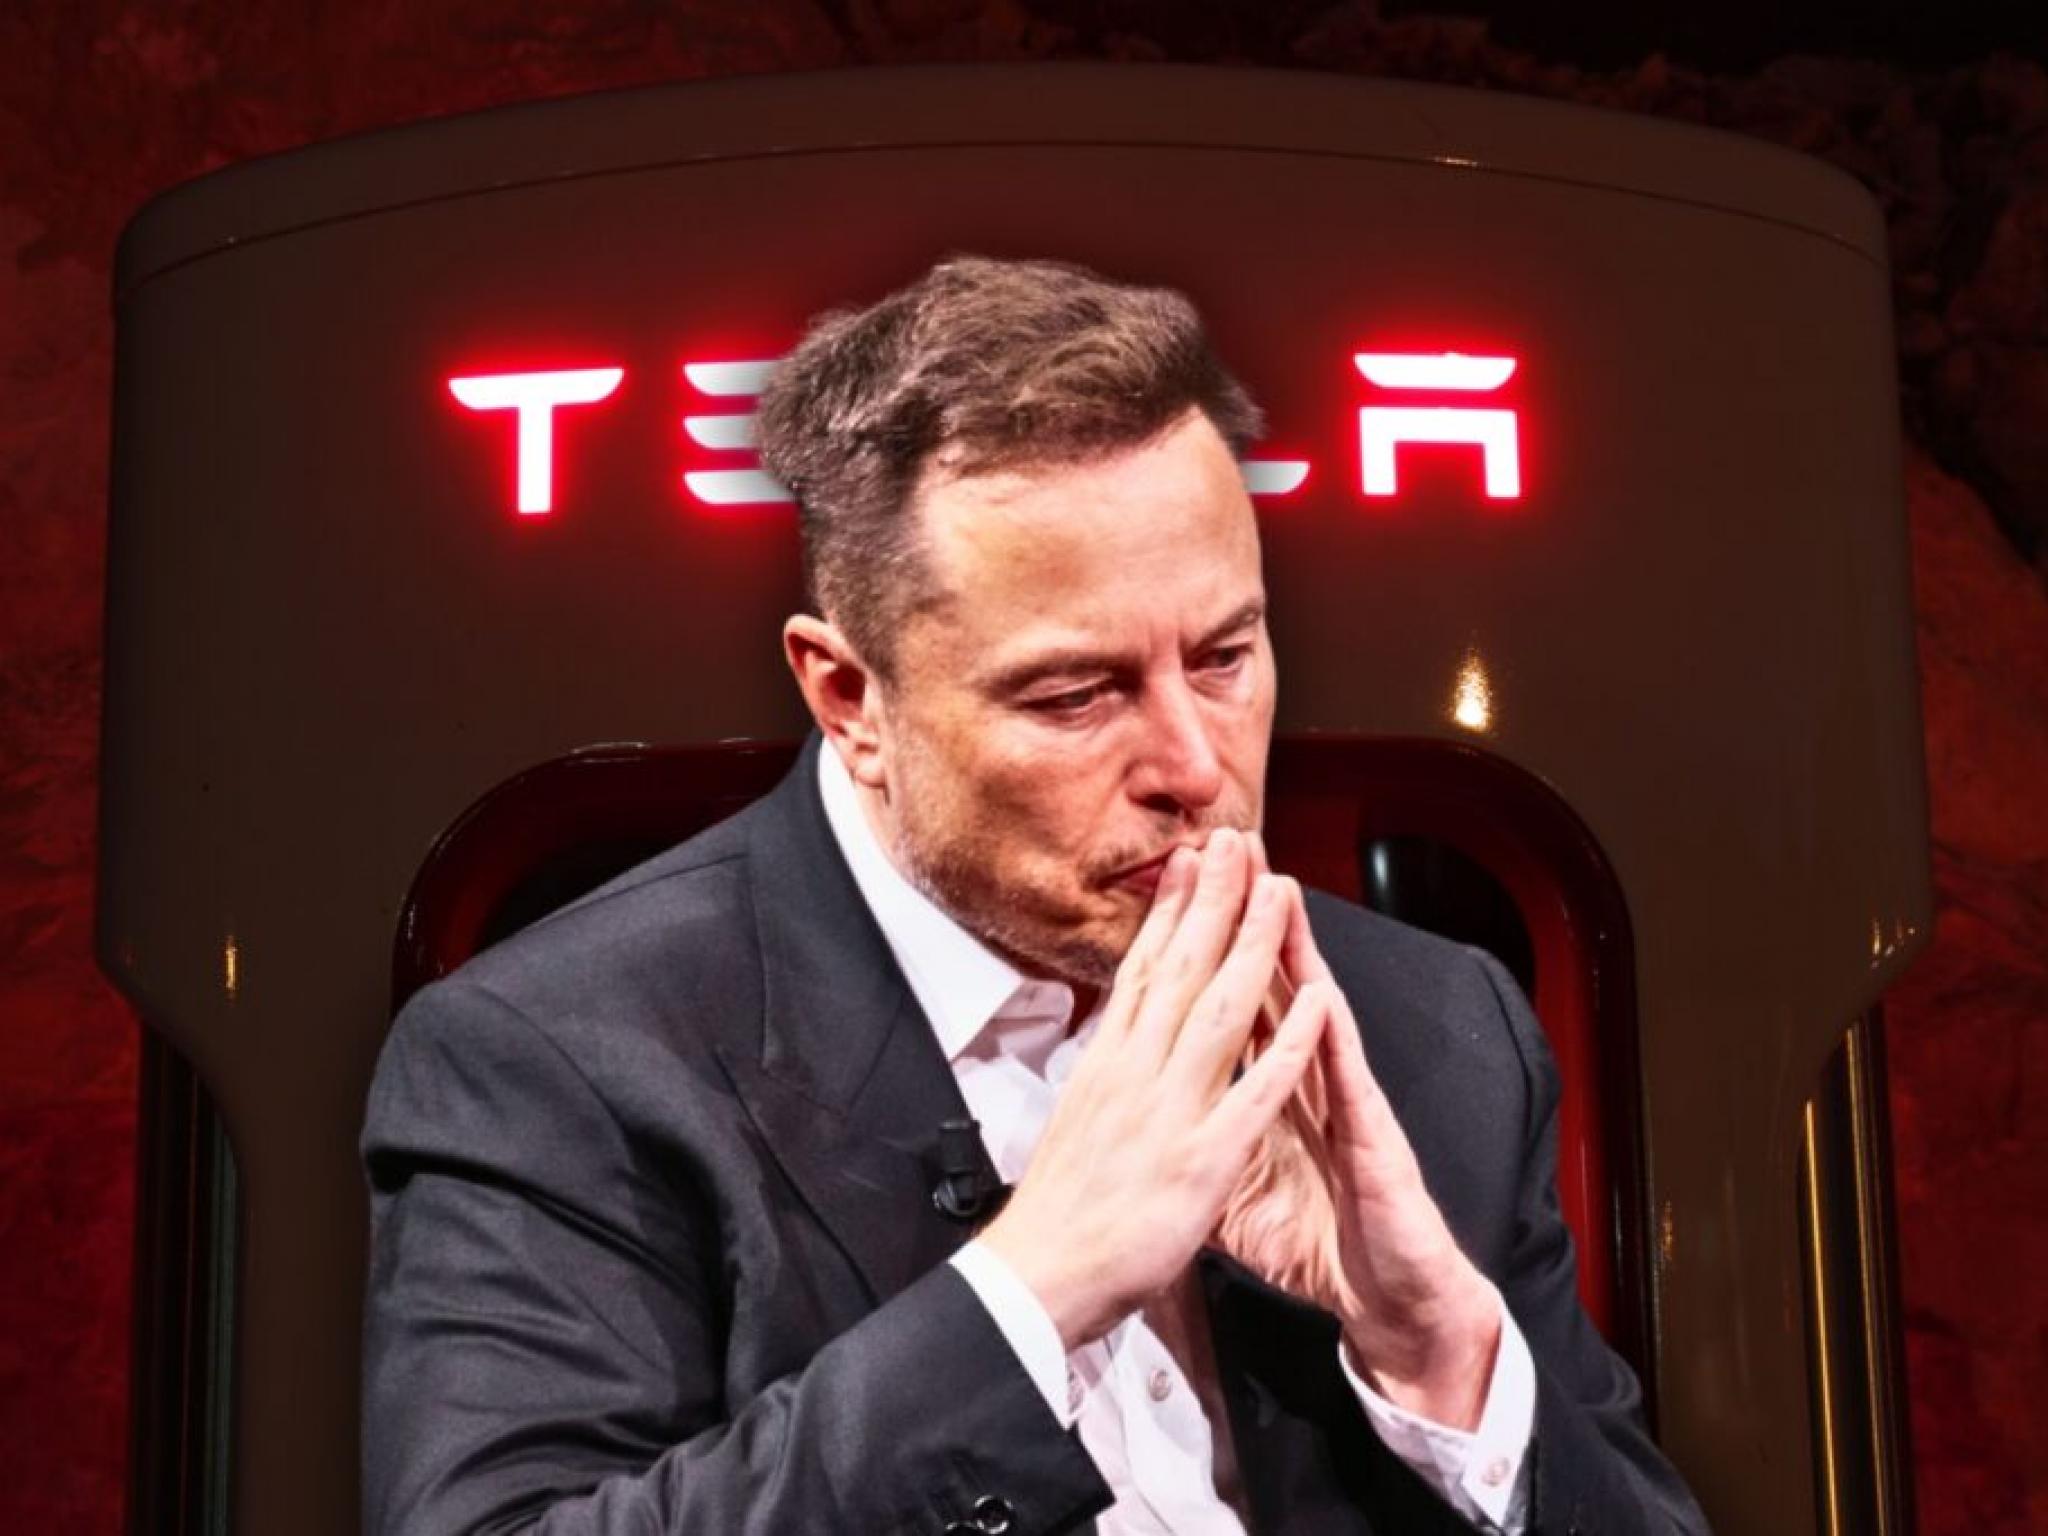  tesla-is-musk-musk-is-tesla-dan-ives-emphasizes-ahead-of-shareholder-vote-former-ford-ceo-warns-of-significant-talent-drain-if-the-ceo-leaves 